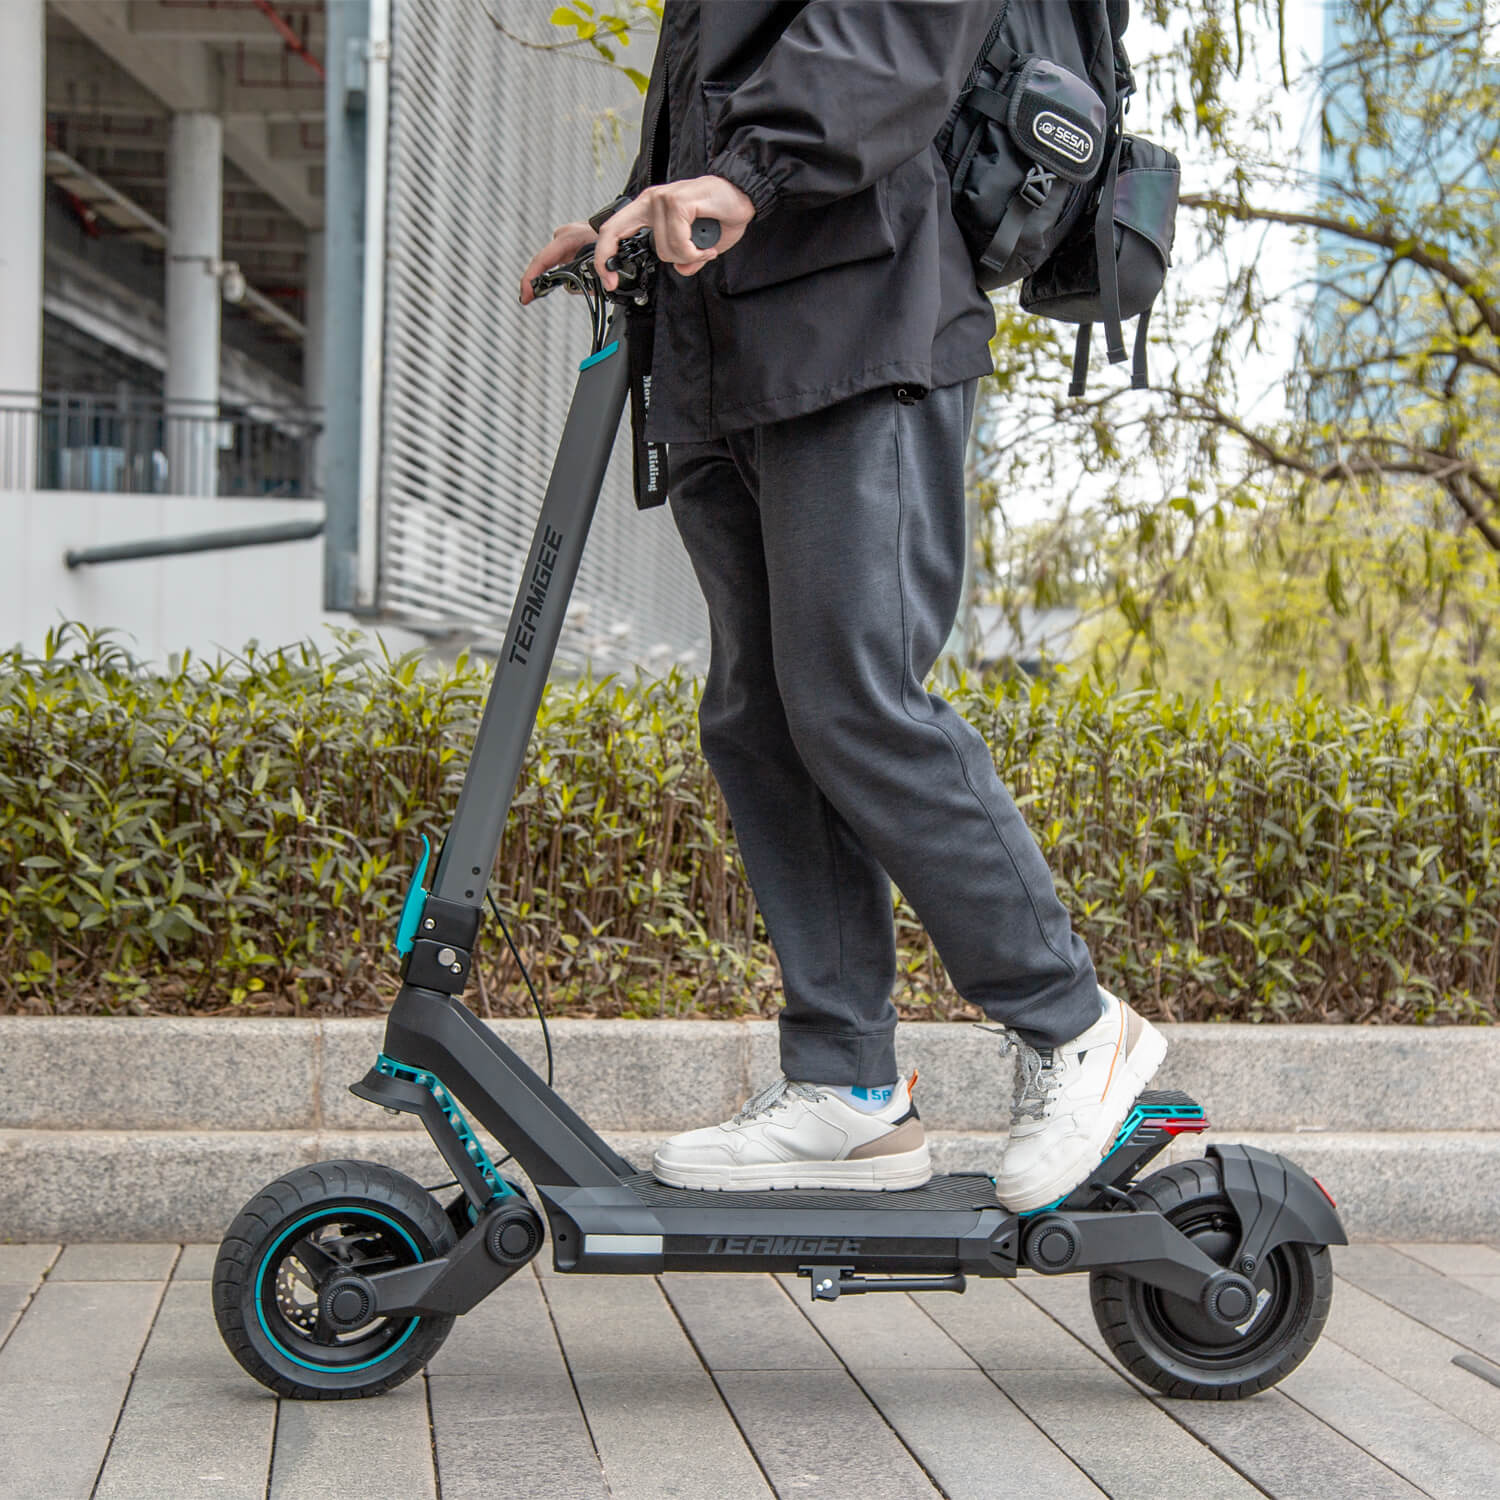 Hot Sale]Teamgee Electric Scooter | 1200W Powerful Motor | For Commuting & Cruising – Teamgee Skateboard